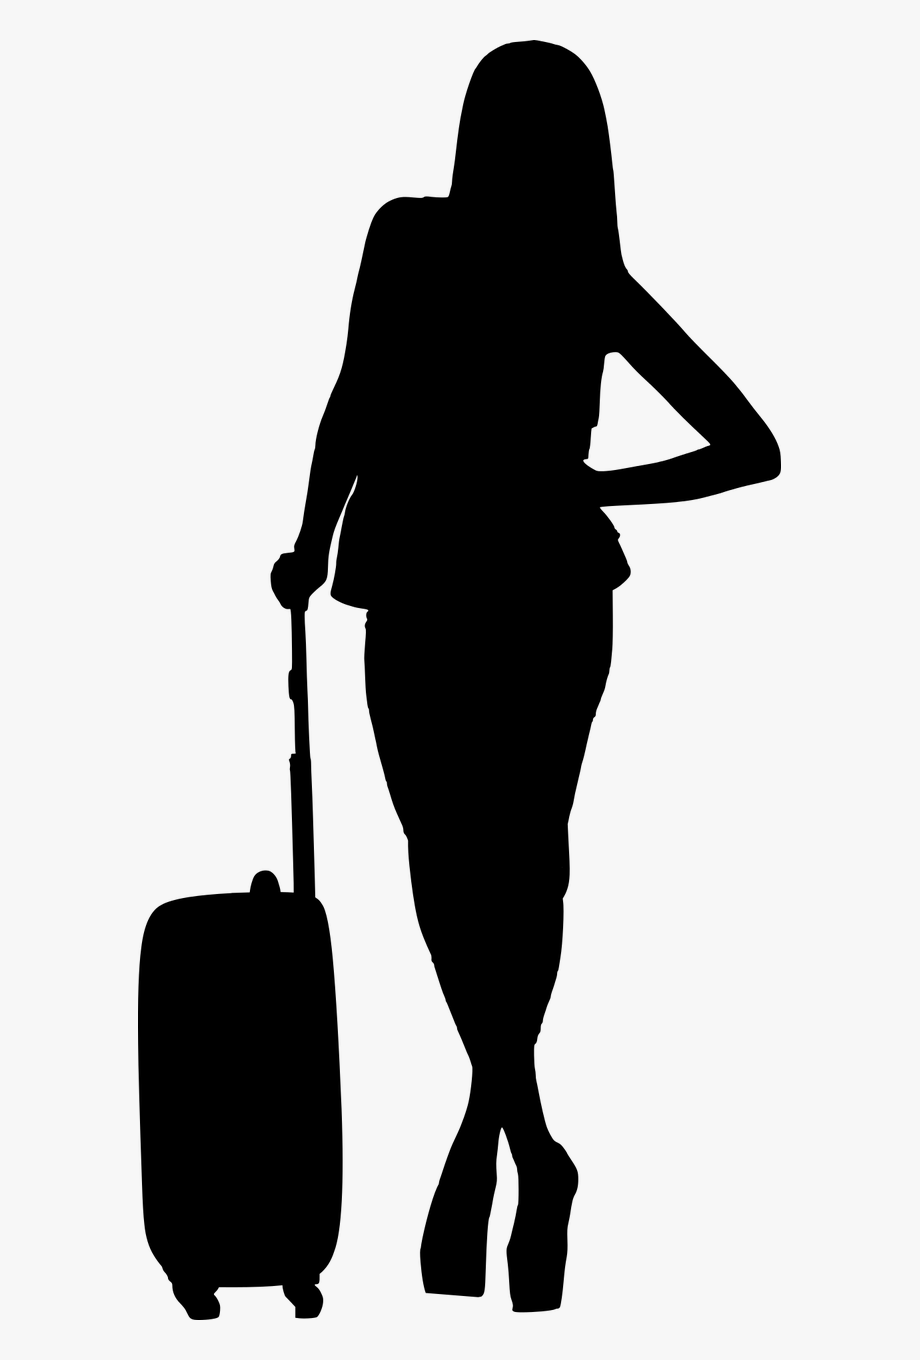 Free Download Travel Silhouette